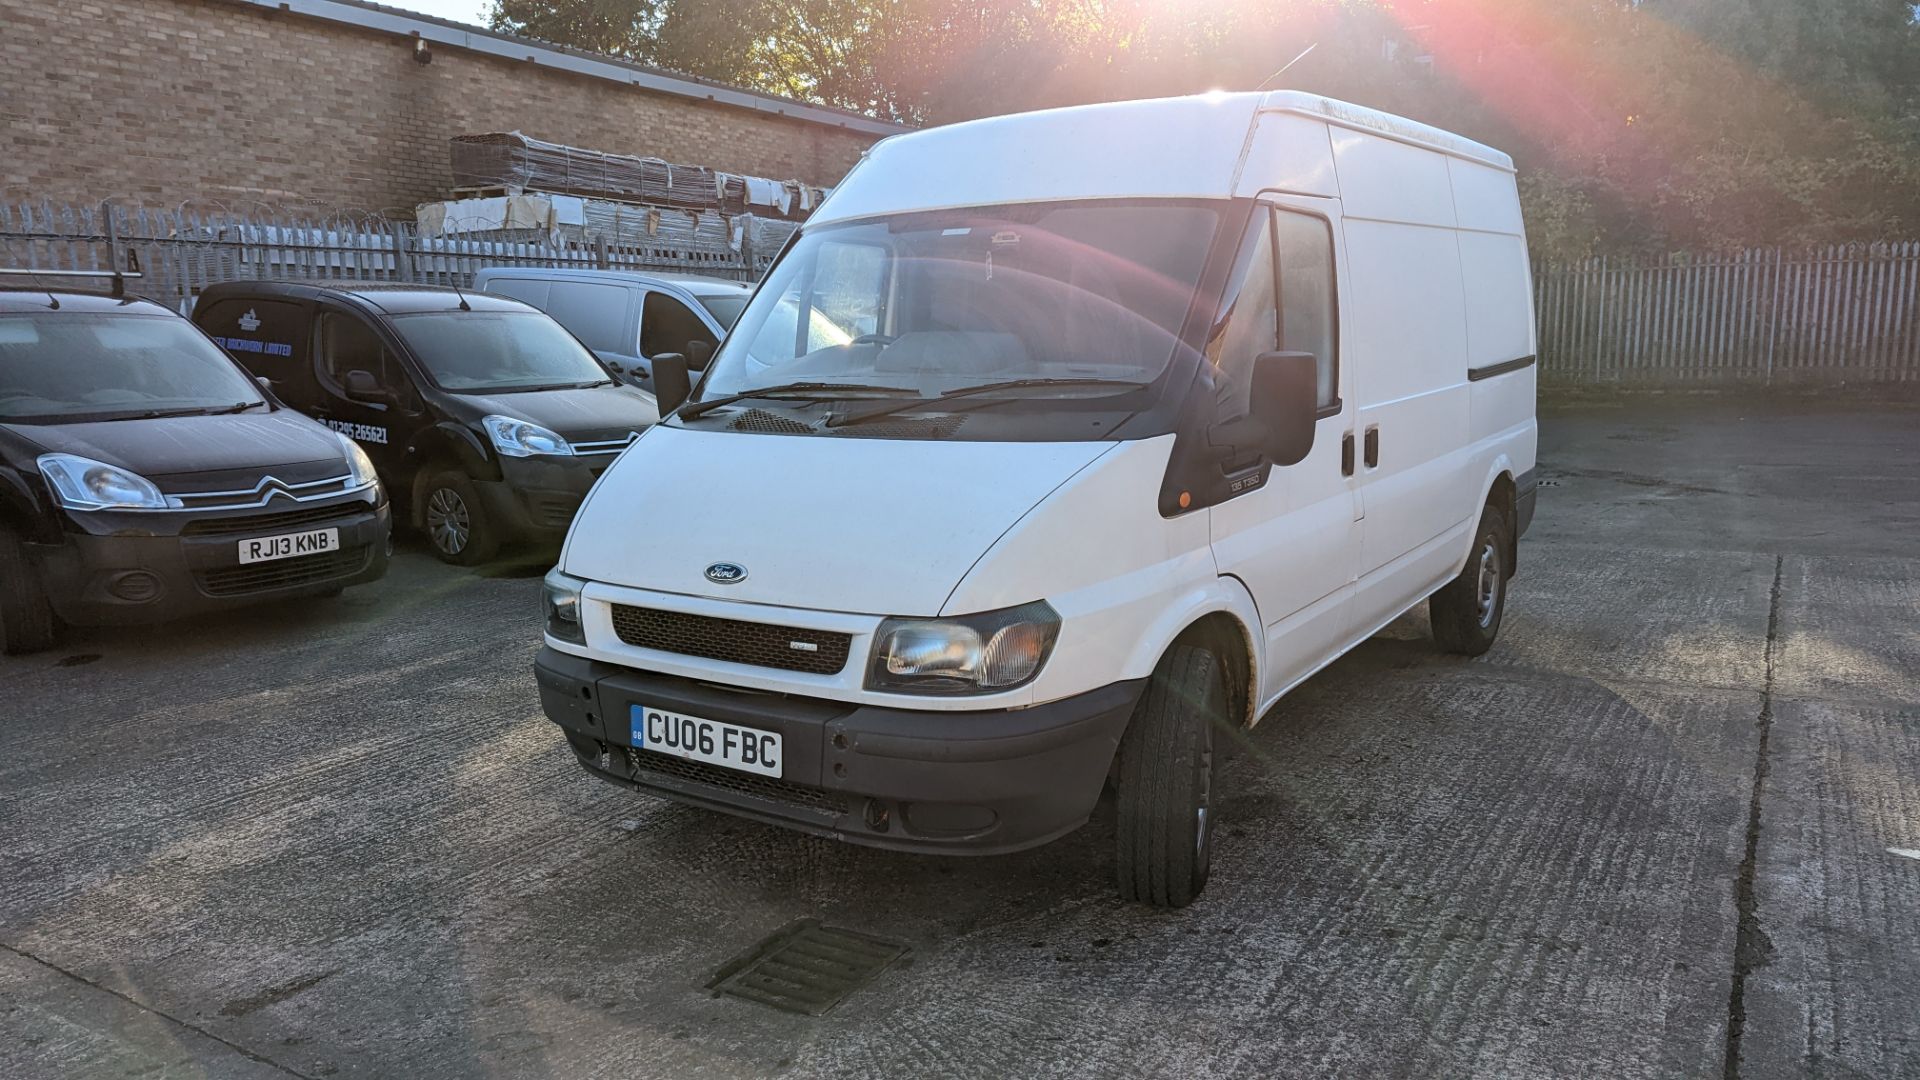 CU06 FBC Ford Transit panel van, 6 speed manual gearbox, 2402cc diesel engine. Colour: white. Fir - Image 39 of 44